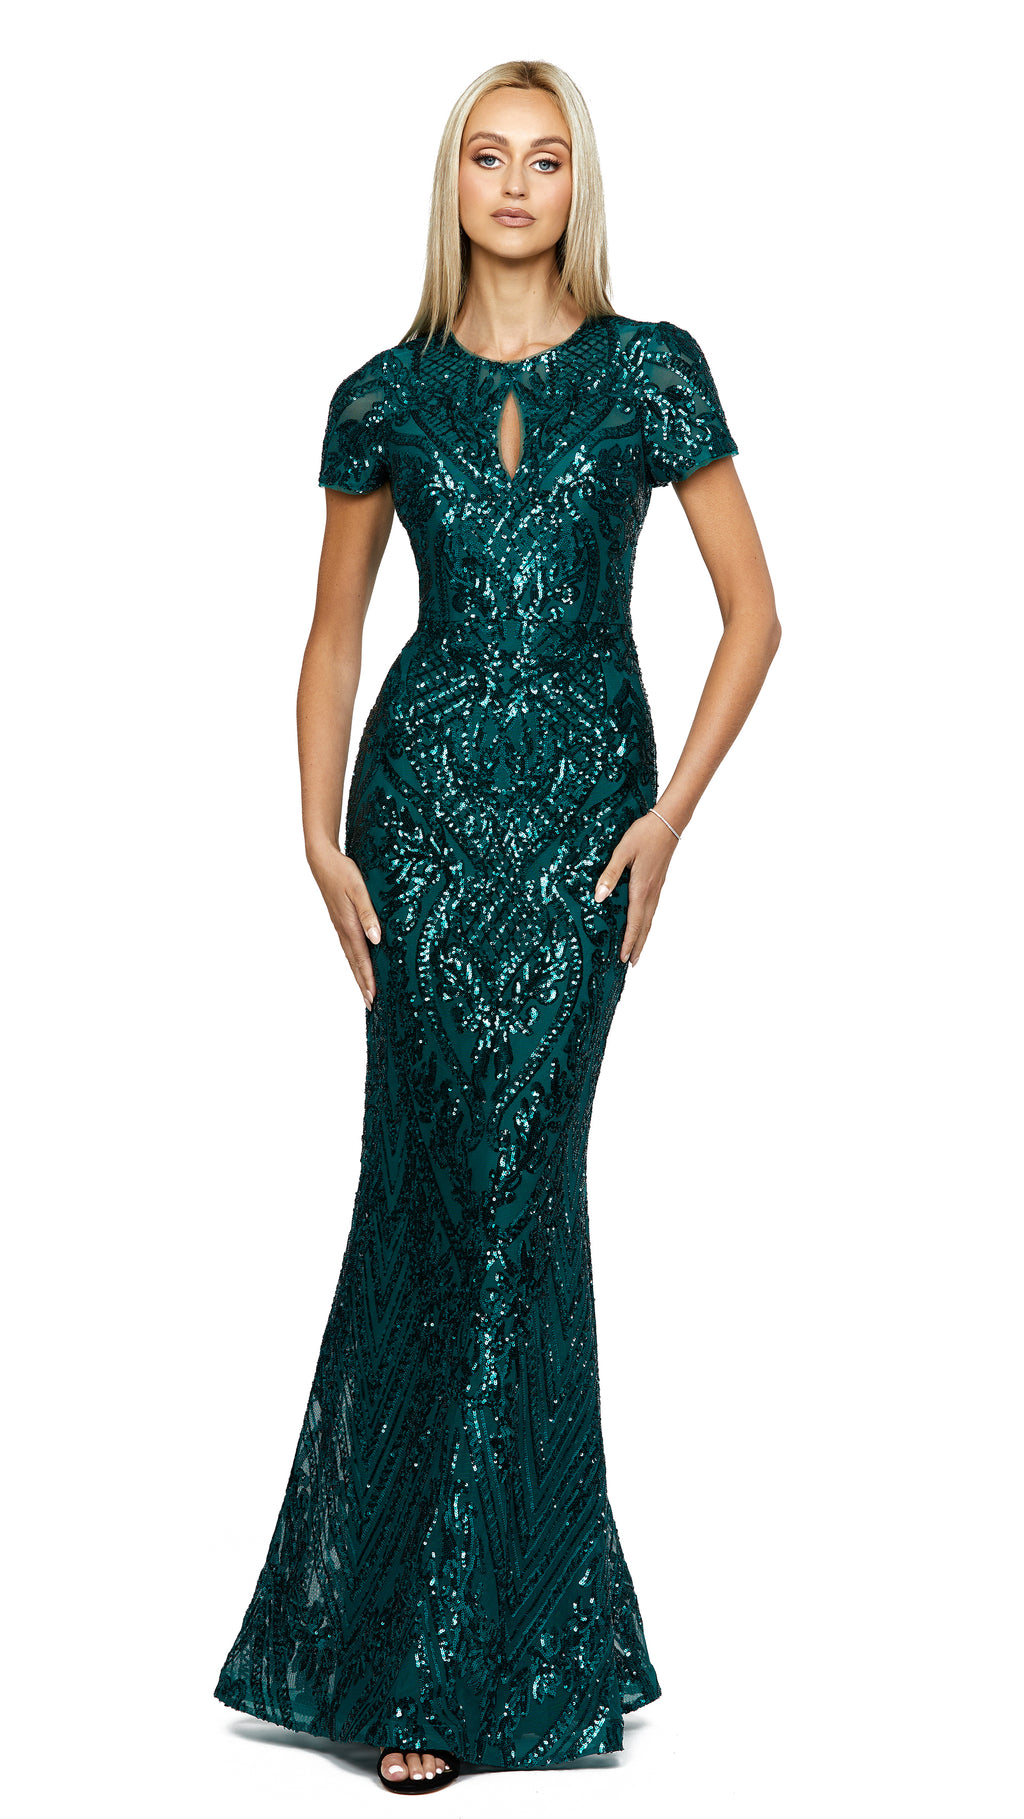 Brienne Short Sleeve Gown in Emerald